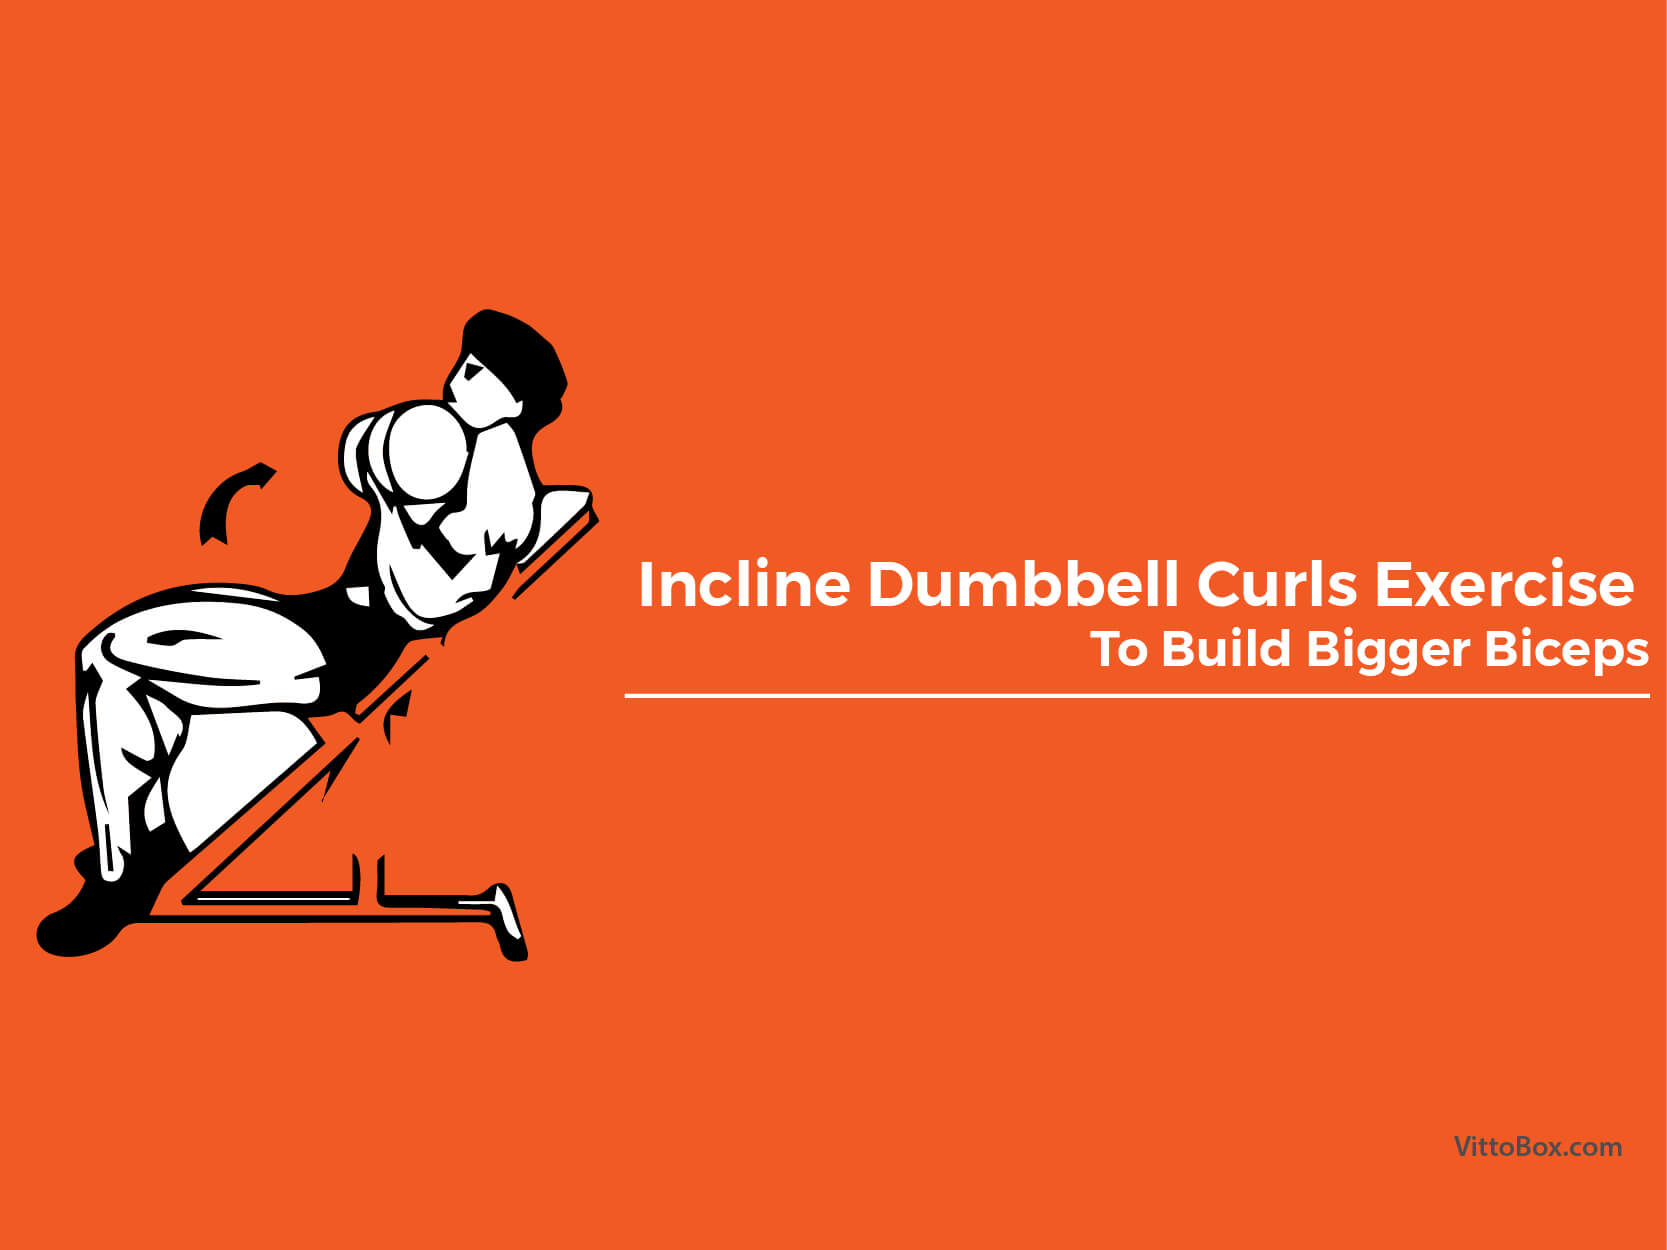 Incline Dumbbell Curls Exercise To Build Bigger Biceps